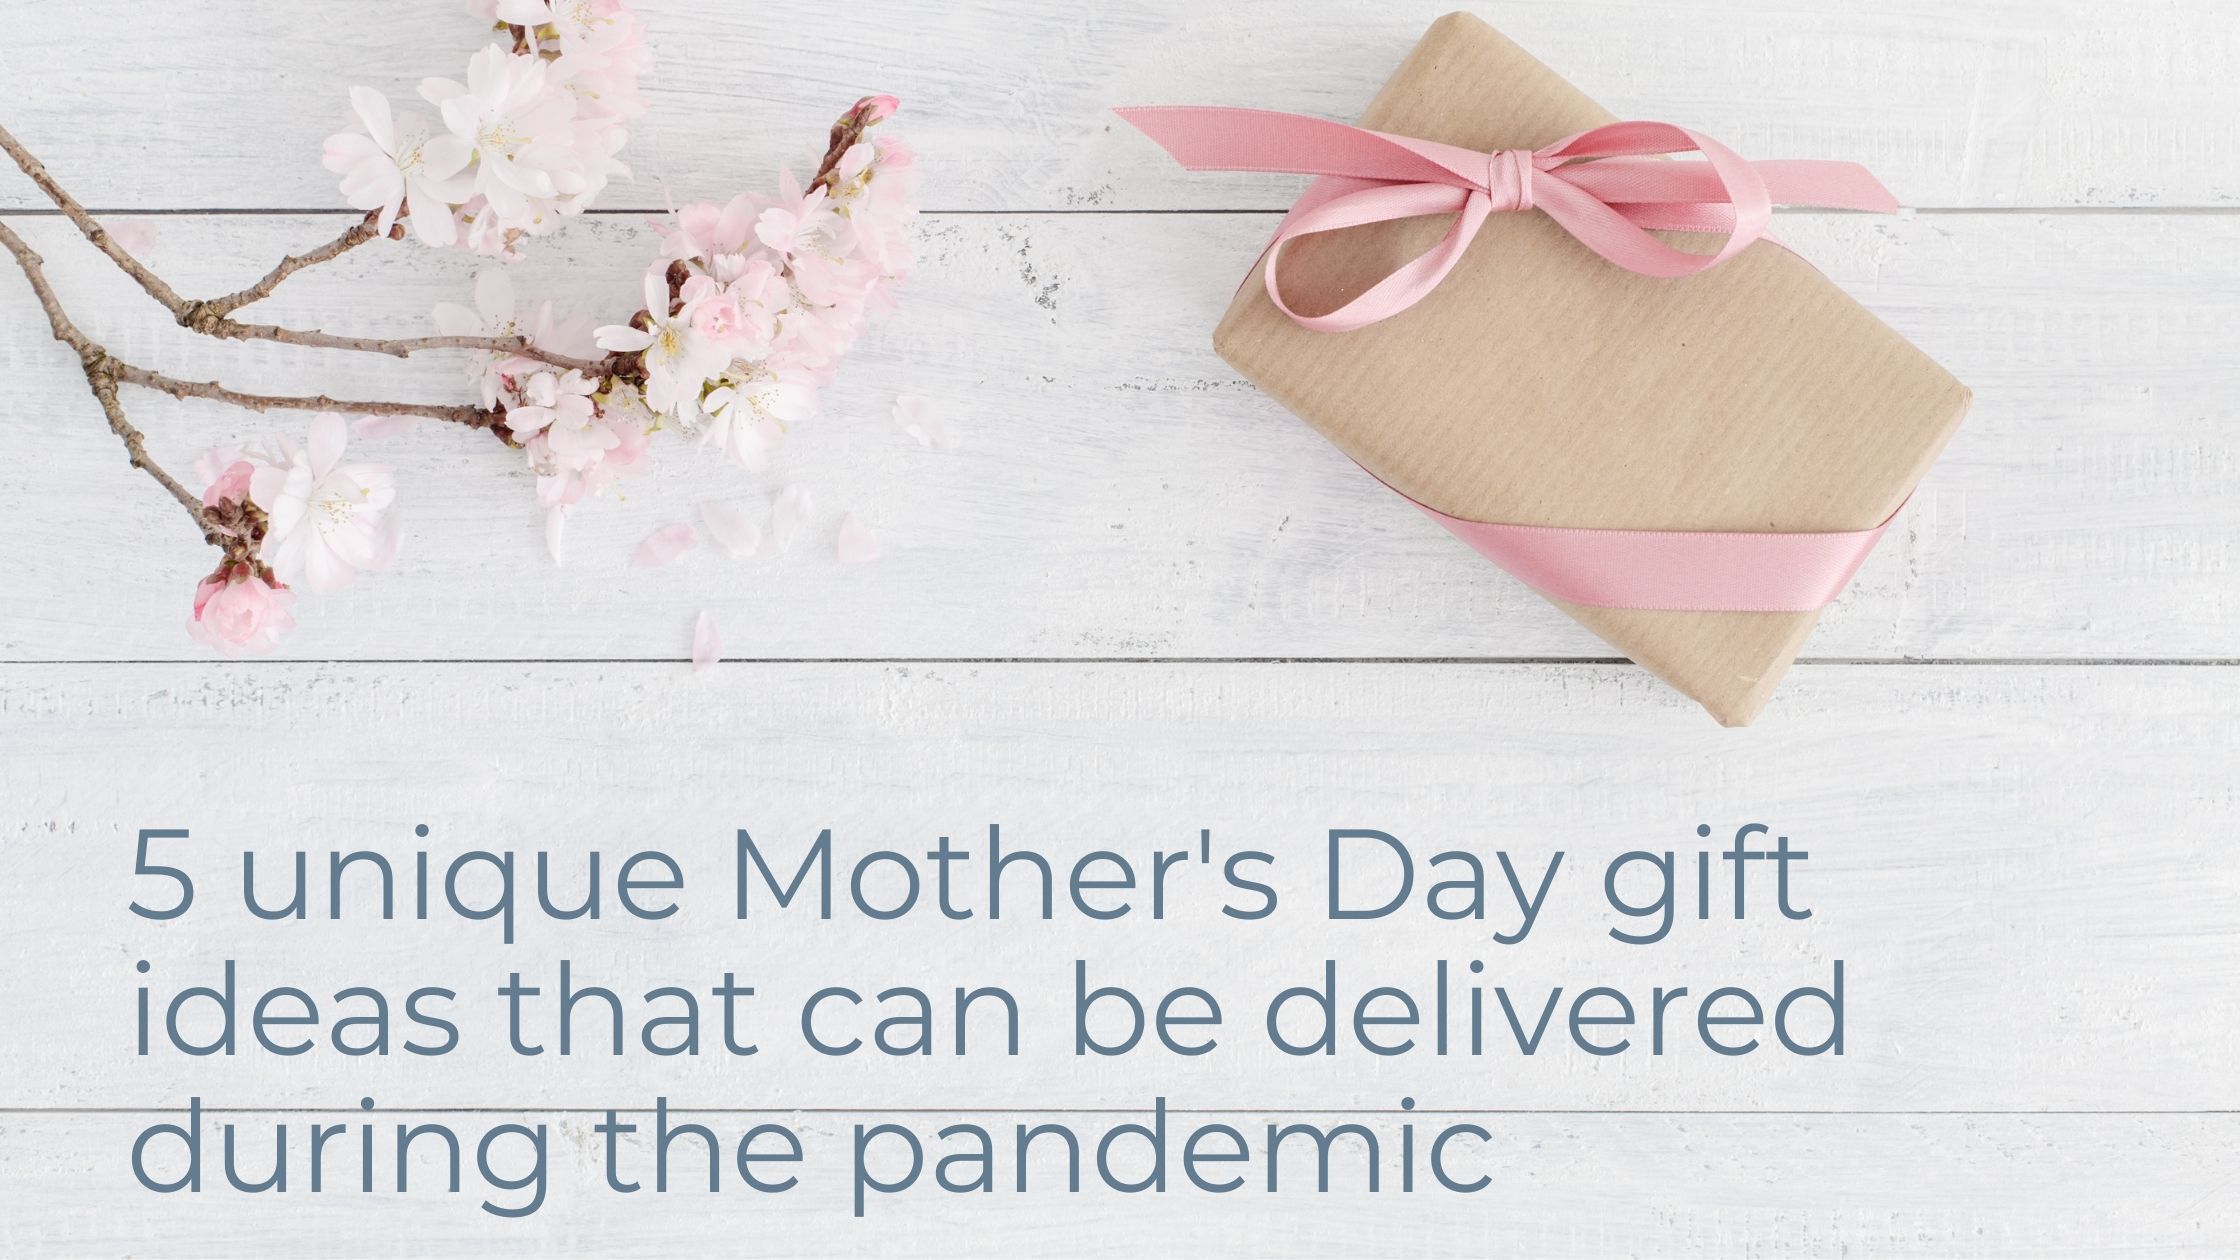 5 unique mother's day gift ideas cover